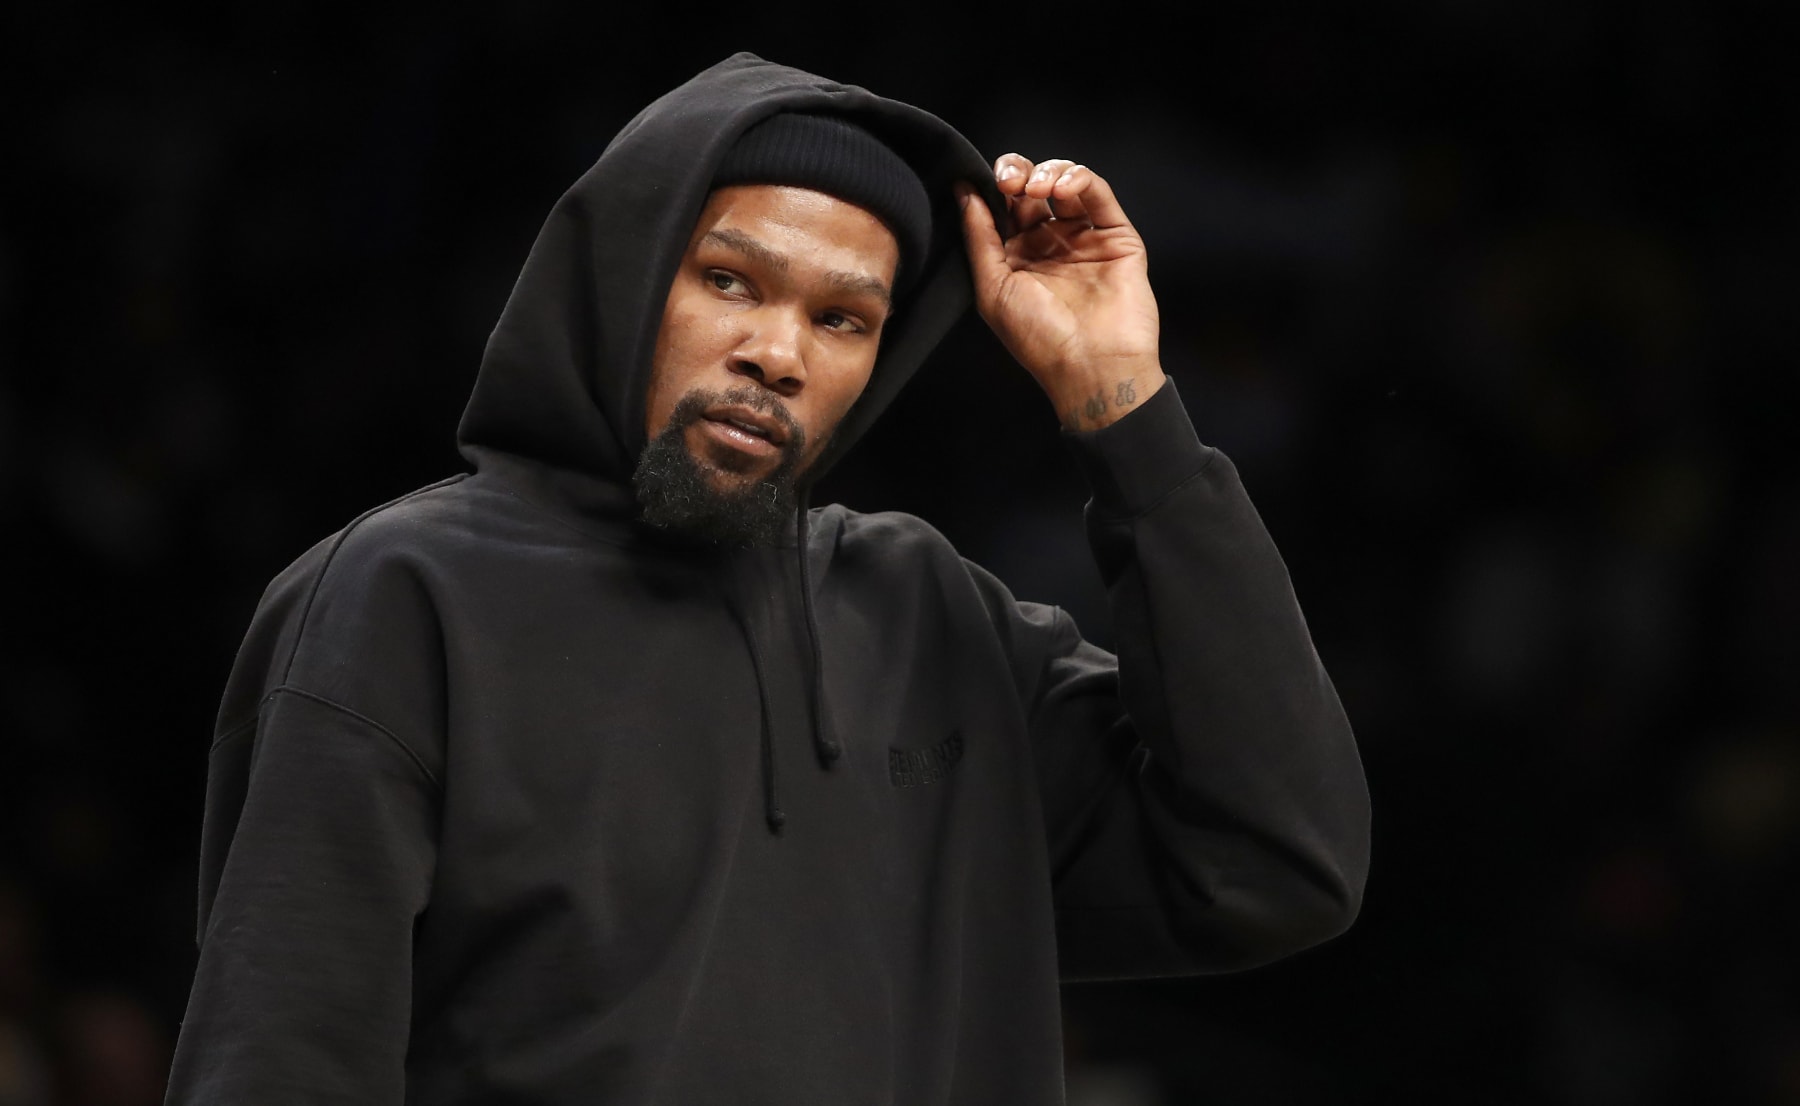 Kevin Durant Outfit from July 26, 2021, WHAT'S ON THE STAR?